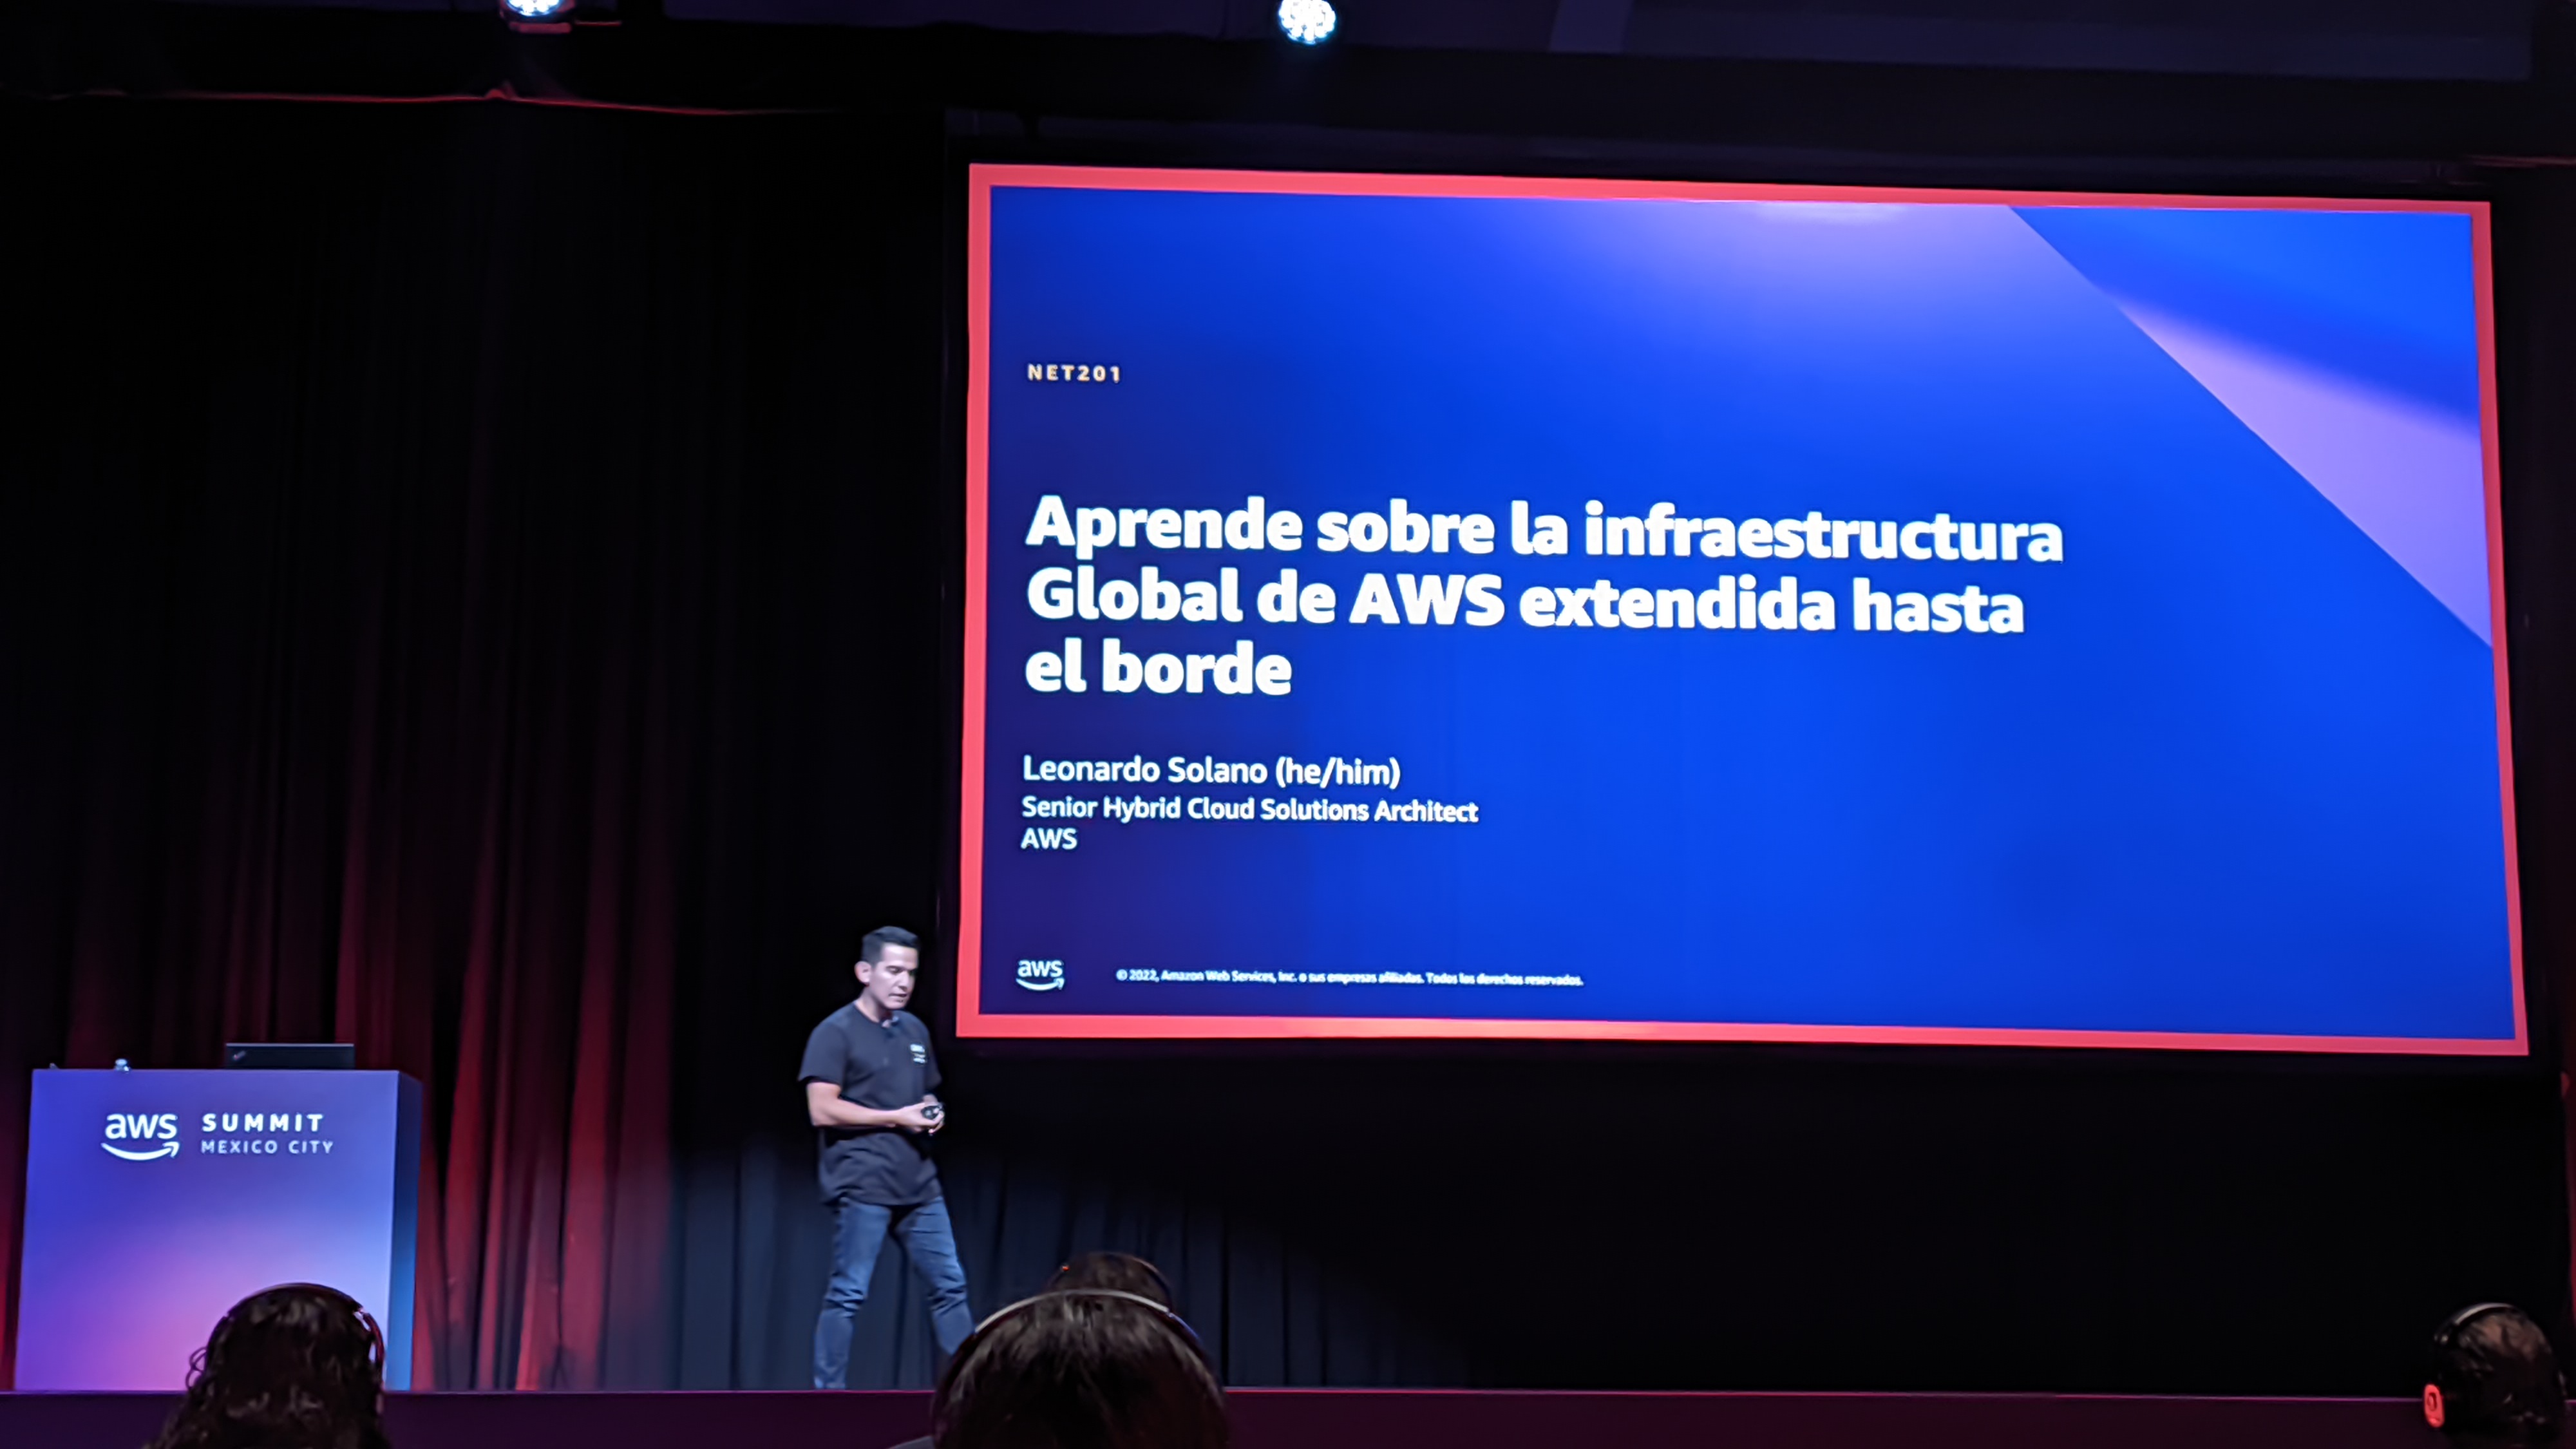 AWS Summit Mexico City - Global Infrastructure